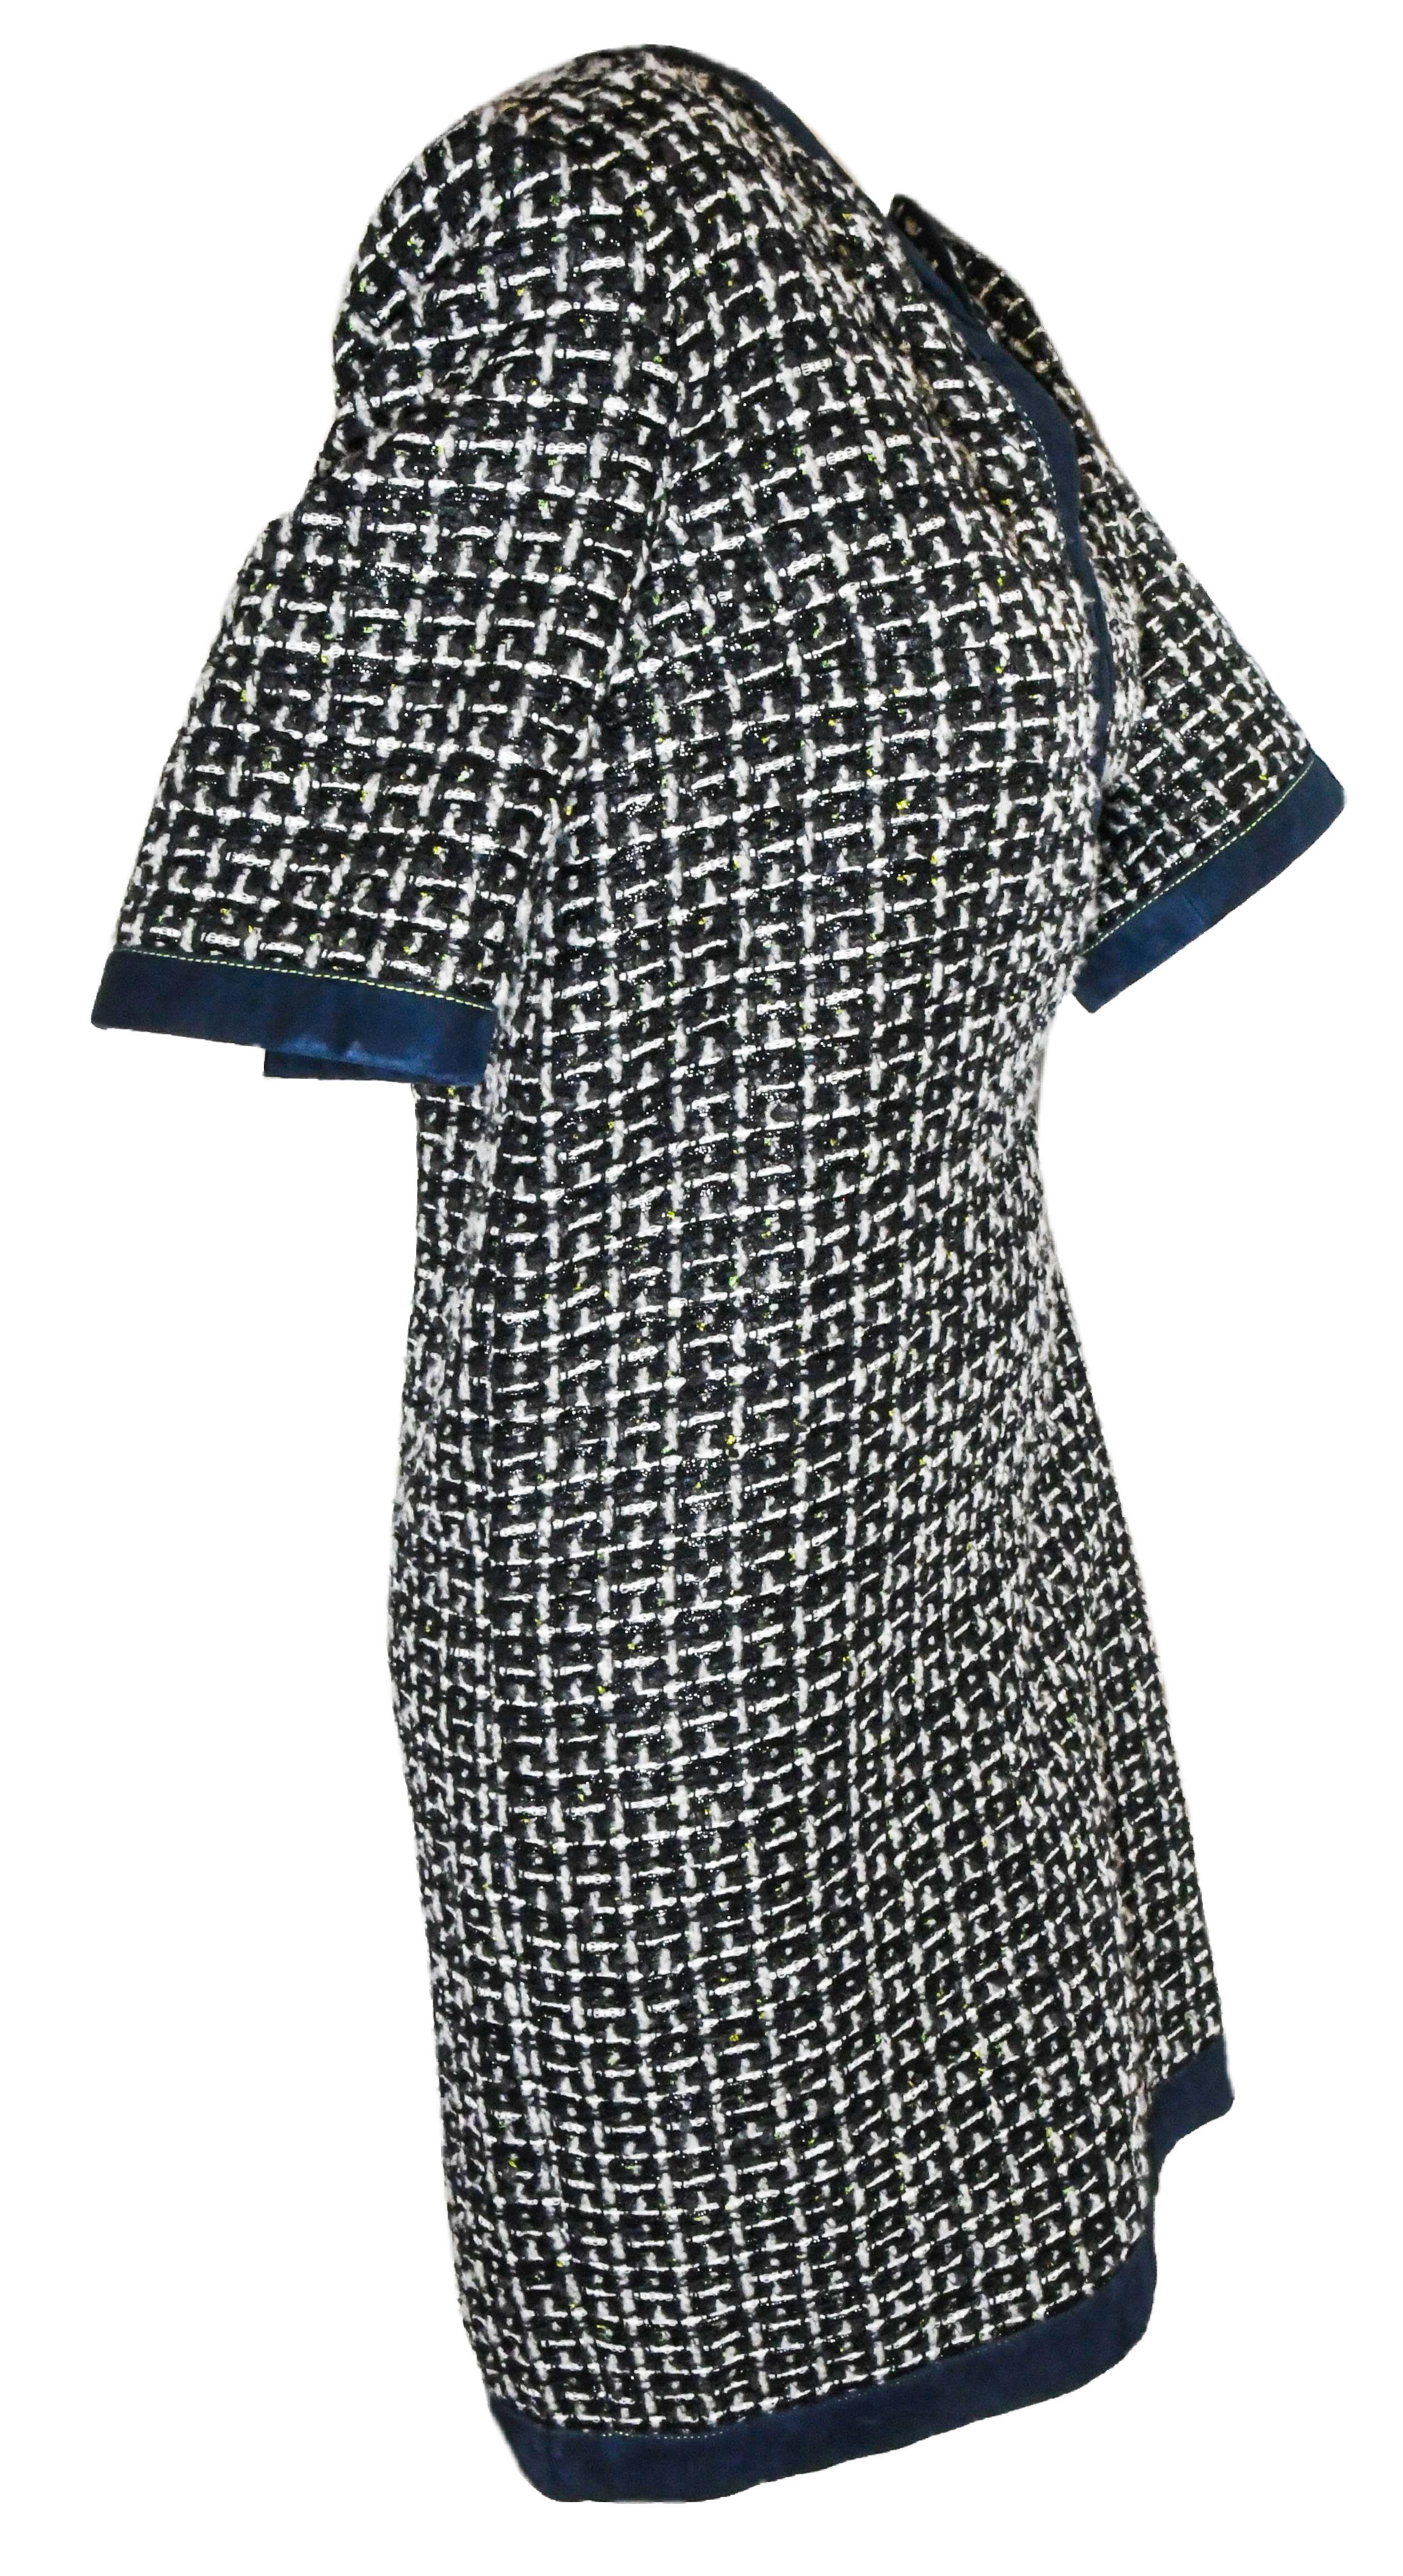 Chanel navy and white check tweed dress contains a lambskin suede trim a hem in deep blue for accent and, also, around the collar.  This dress includes one CC black gripoix plaque at the hip.  This dress is lined in blue camellia silk fabric.   The